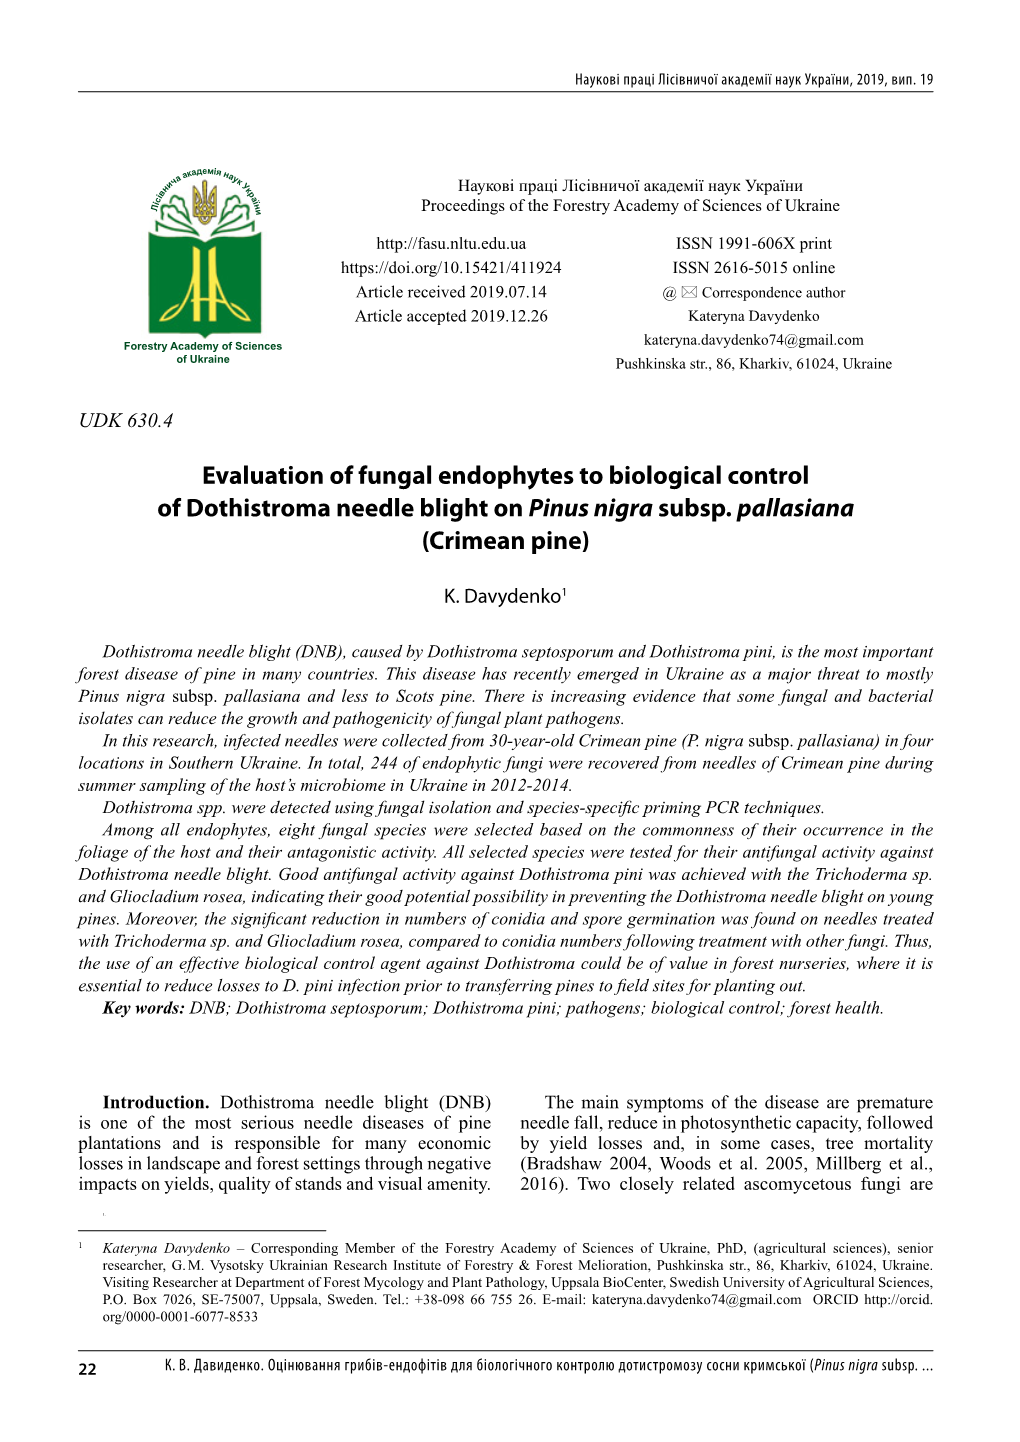 Evaluation of Fungal Endophytes to Biological Control of Dothistroma Needle Blight on Pinus Nigra Subsp